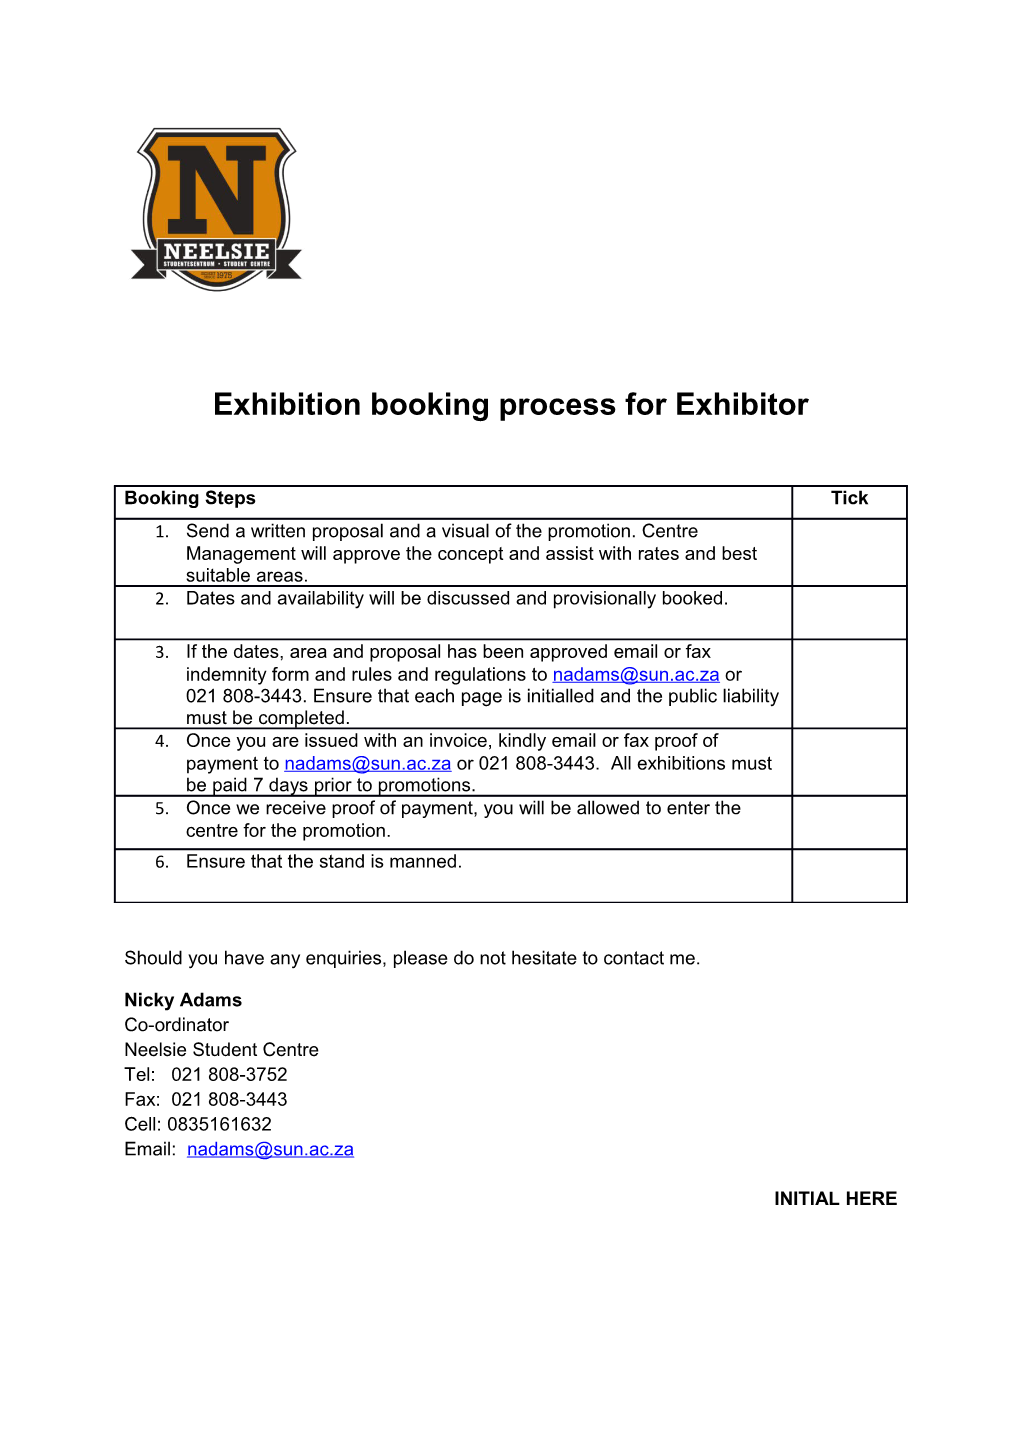 Exhibition Booking Process for Exhibitor